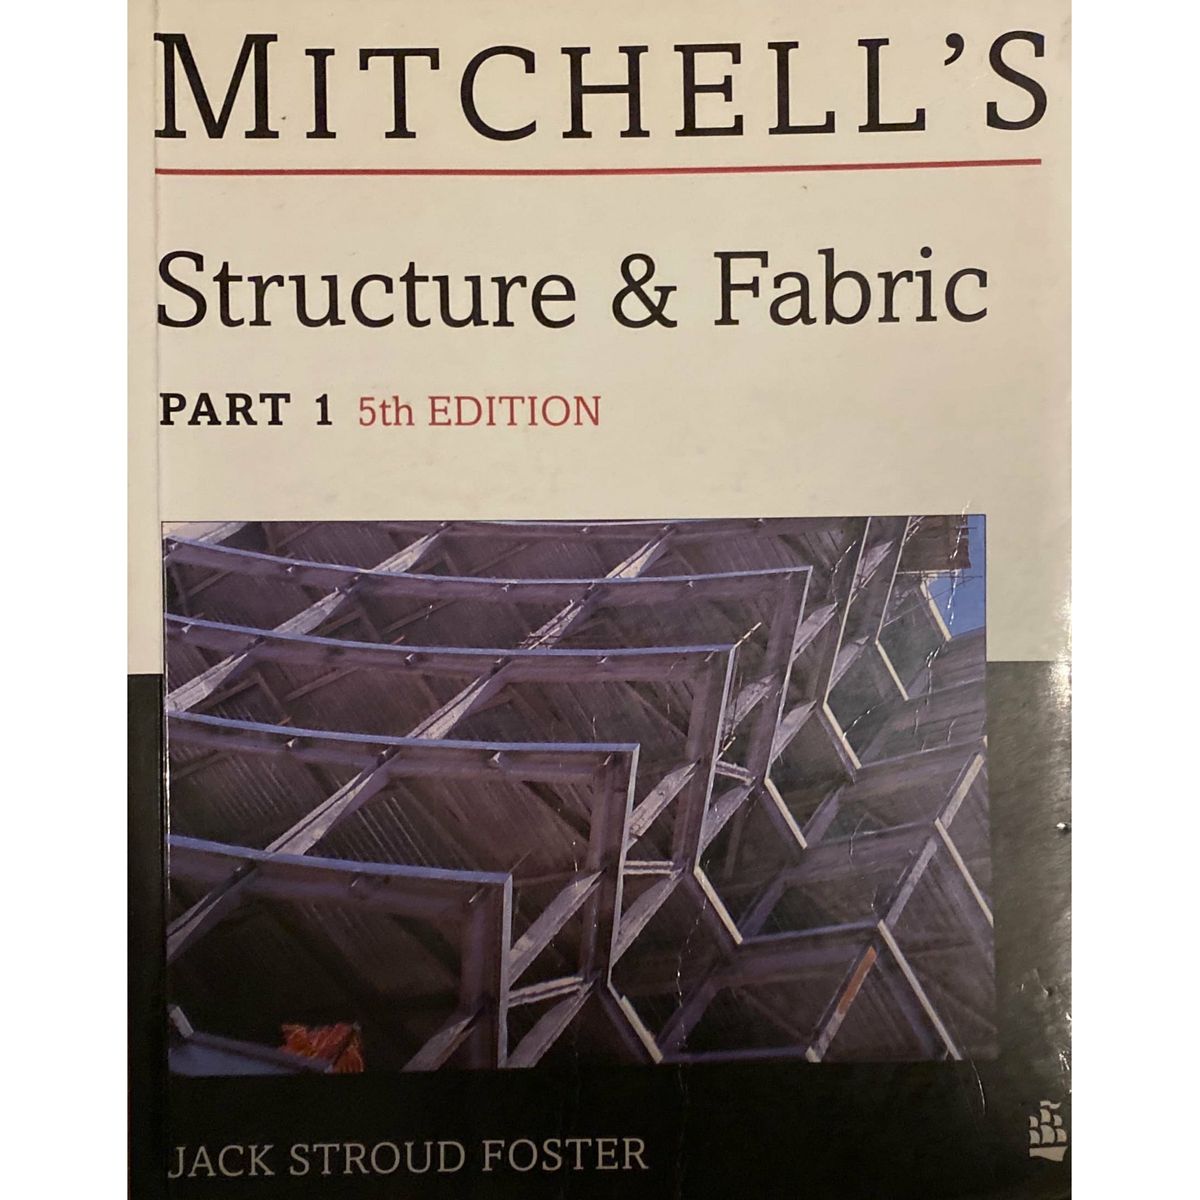 ISBN: 9780582216051 / 0582216052 - Mitchell's Structure and Fabric: Part 1 by Jack Stroud Foster [1994]